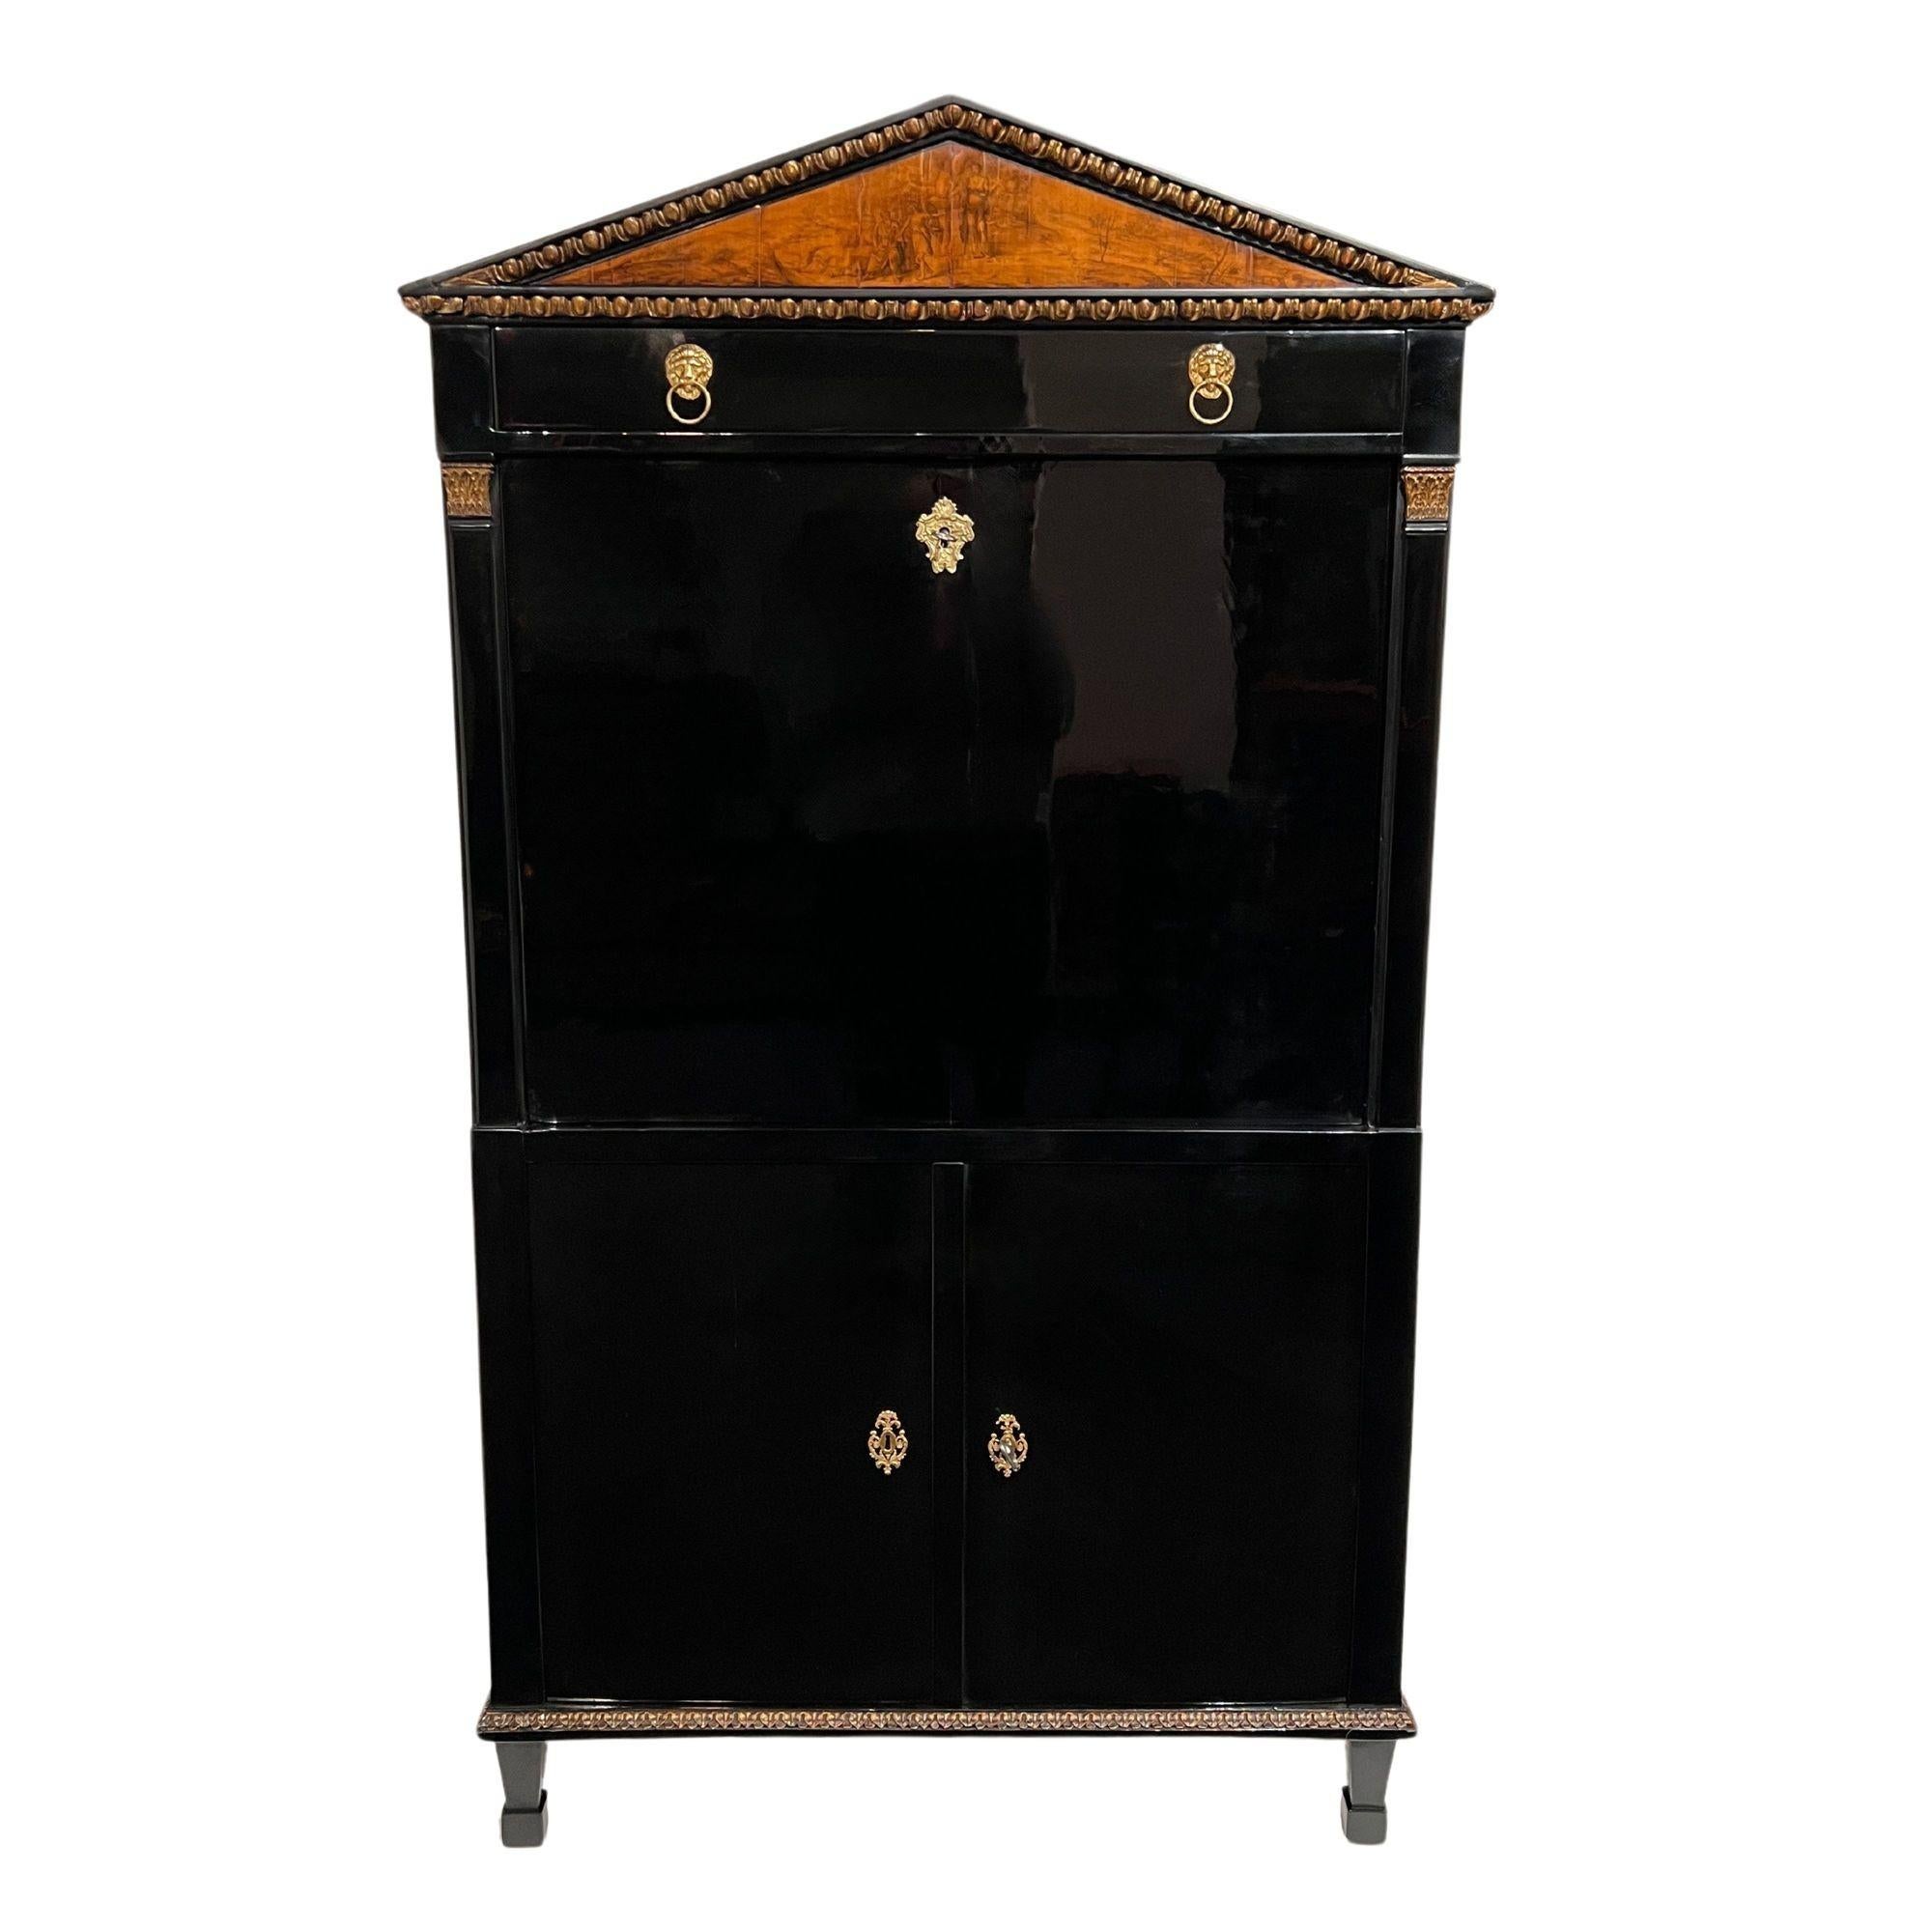 Very fine neoclassical Empire Secretaire or writing cabinet from Austria, Vienna around 1810/15.
Ebonized hardwood body, veneered on oak. Pilaster columns with gilded capitals. All gilding original and patinated.
Classicist gable cornice with